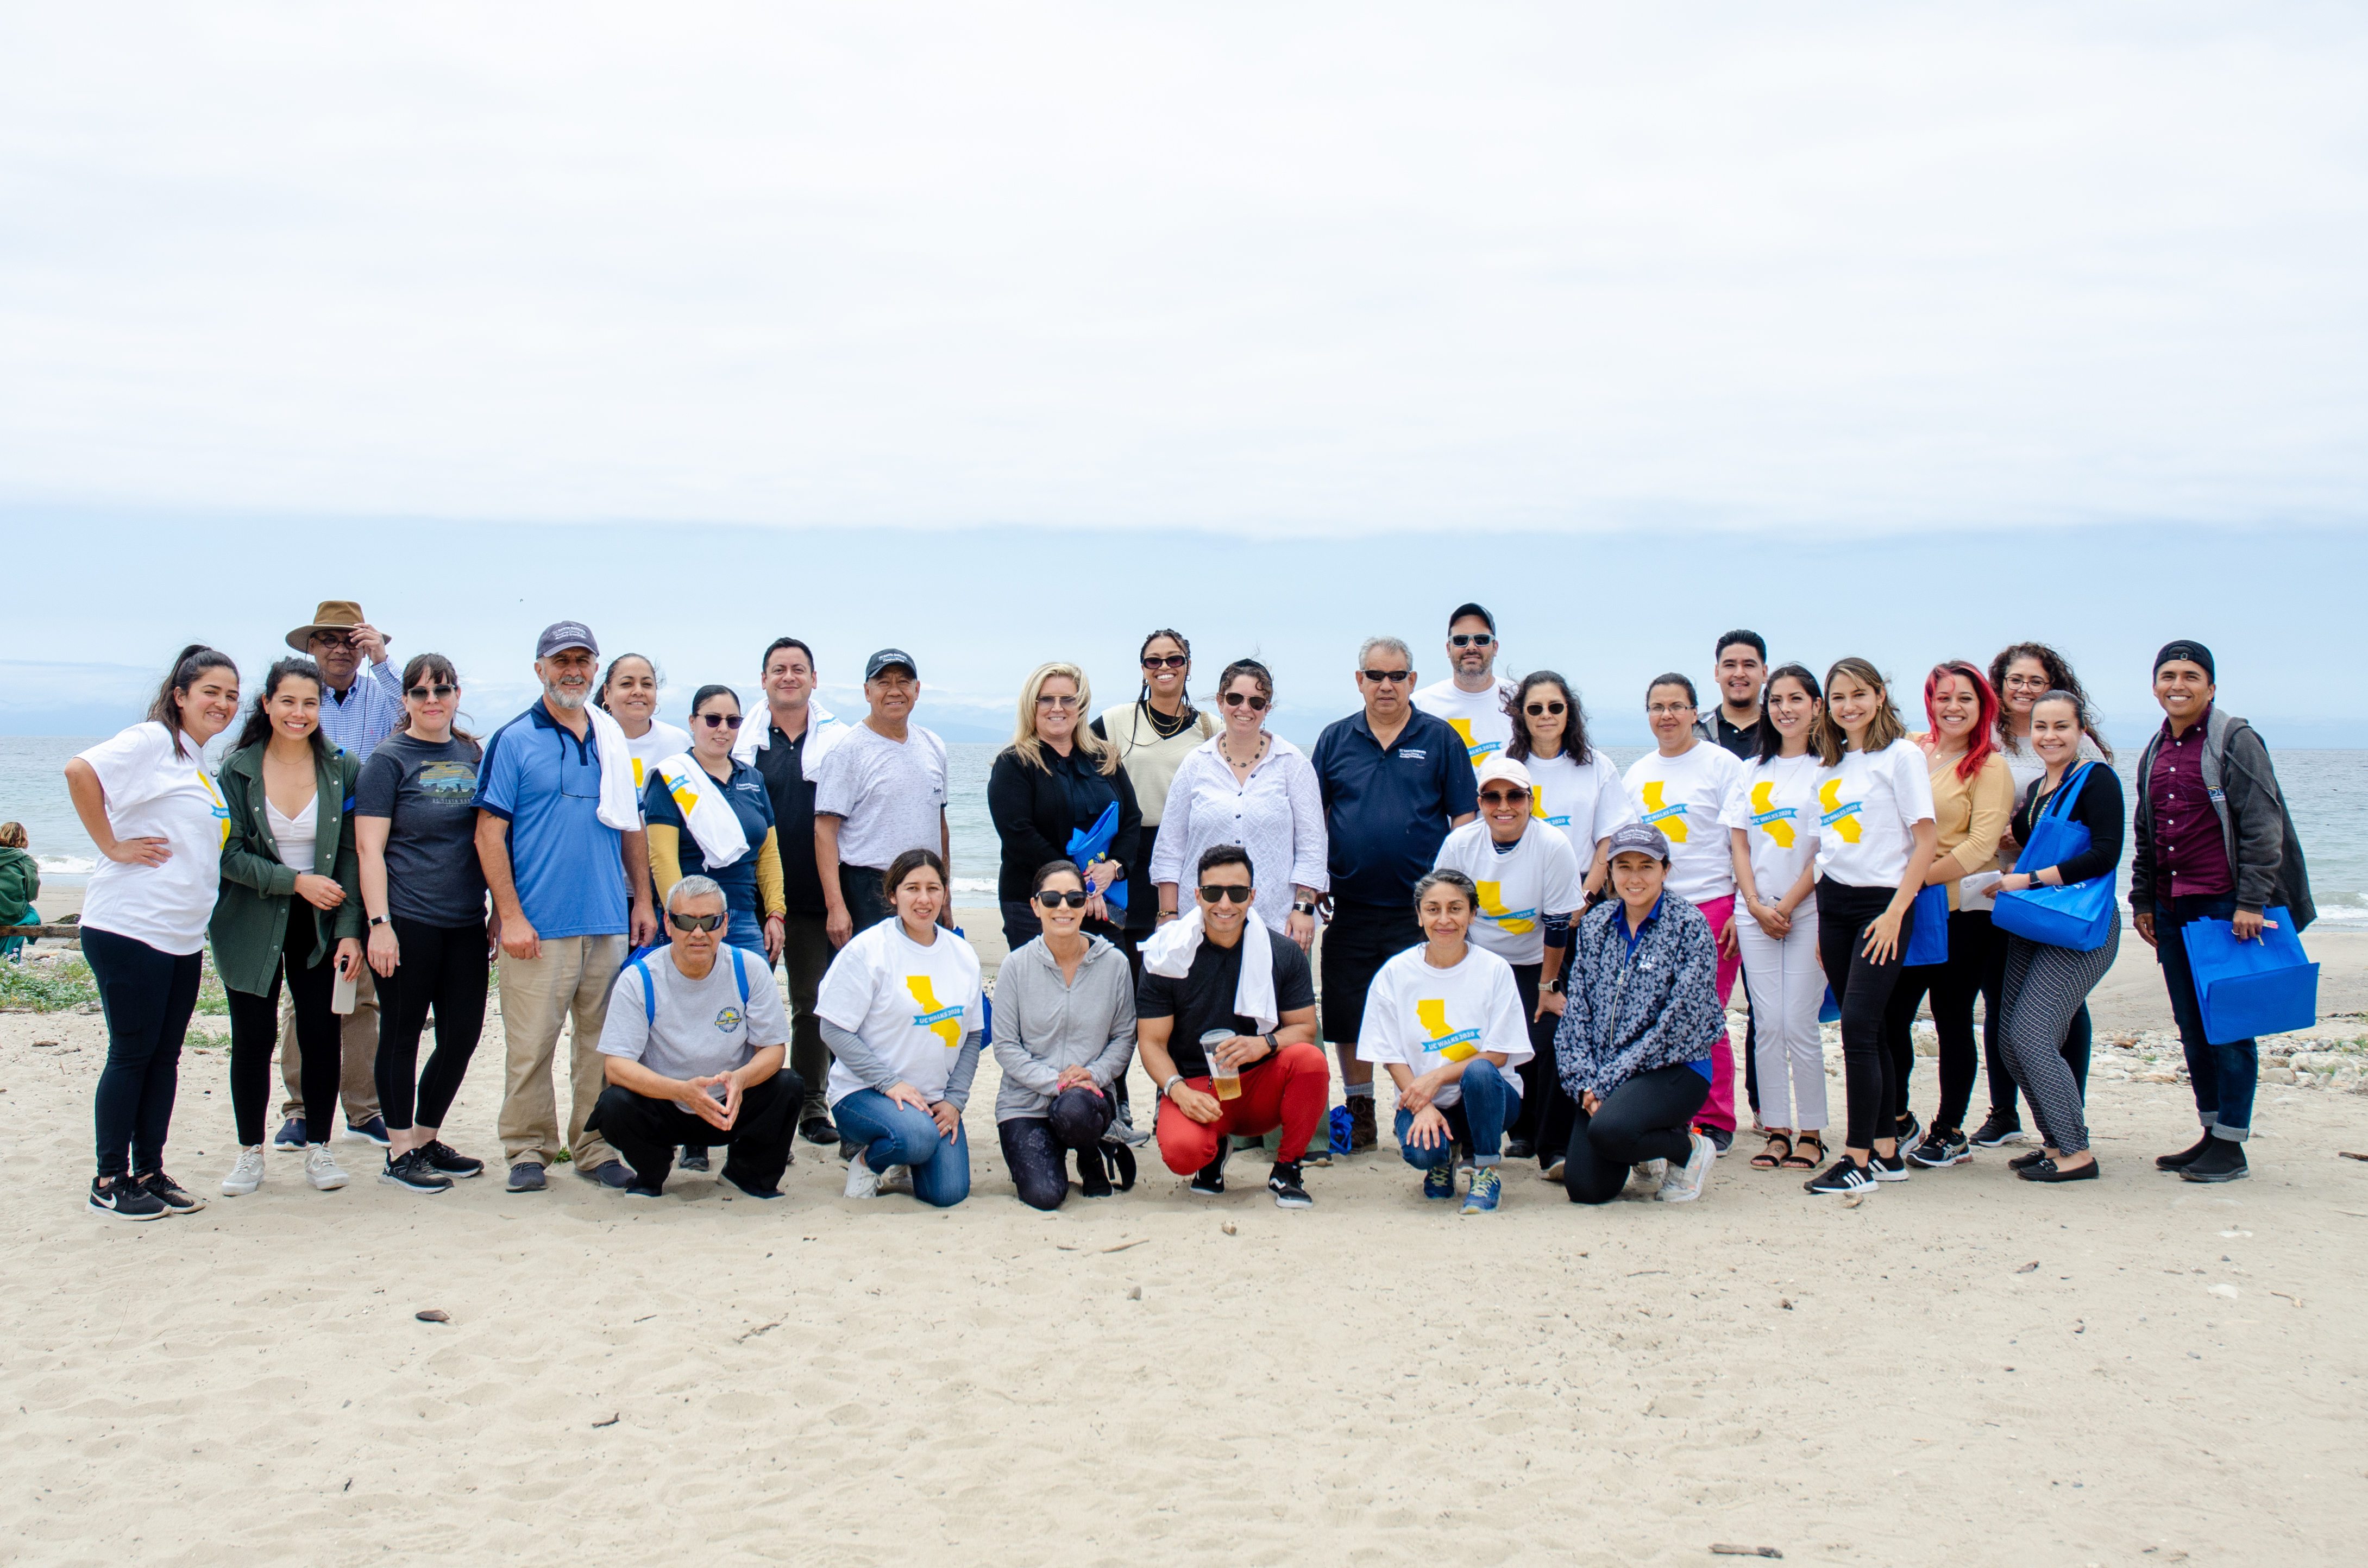 Group photo of UCSB employees on the beach with the oean in the background